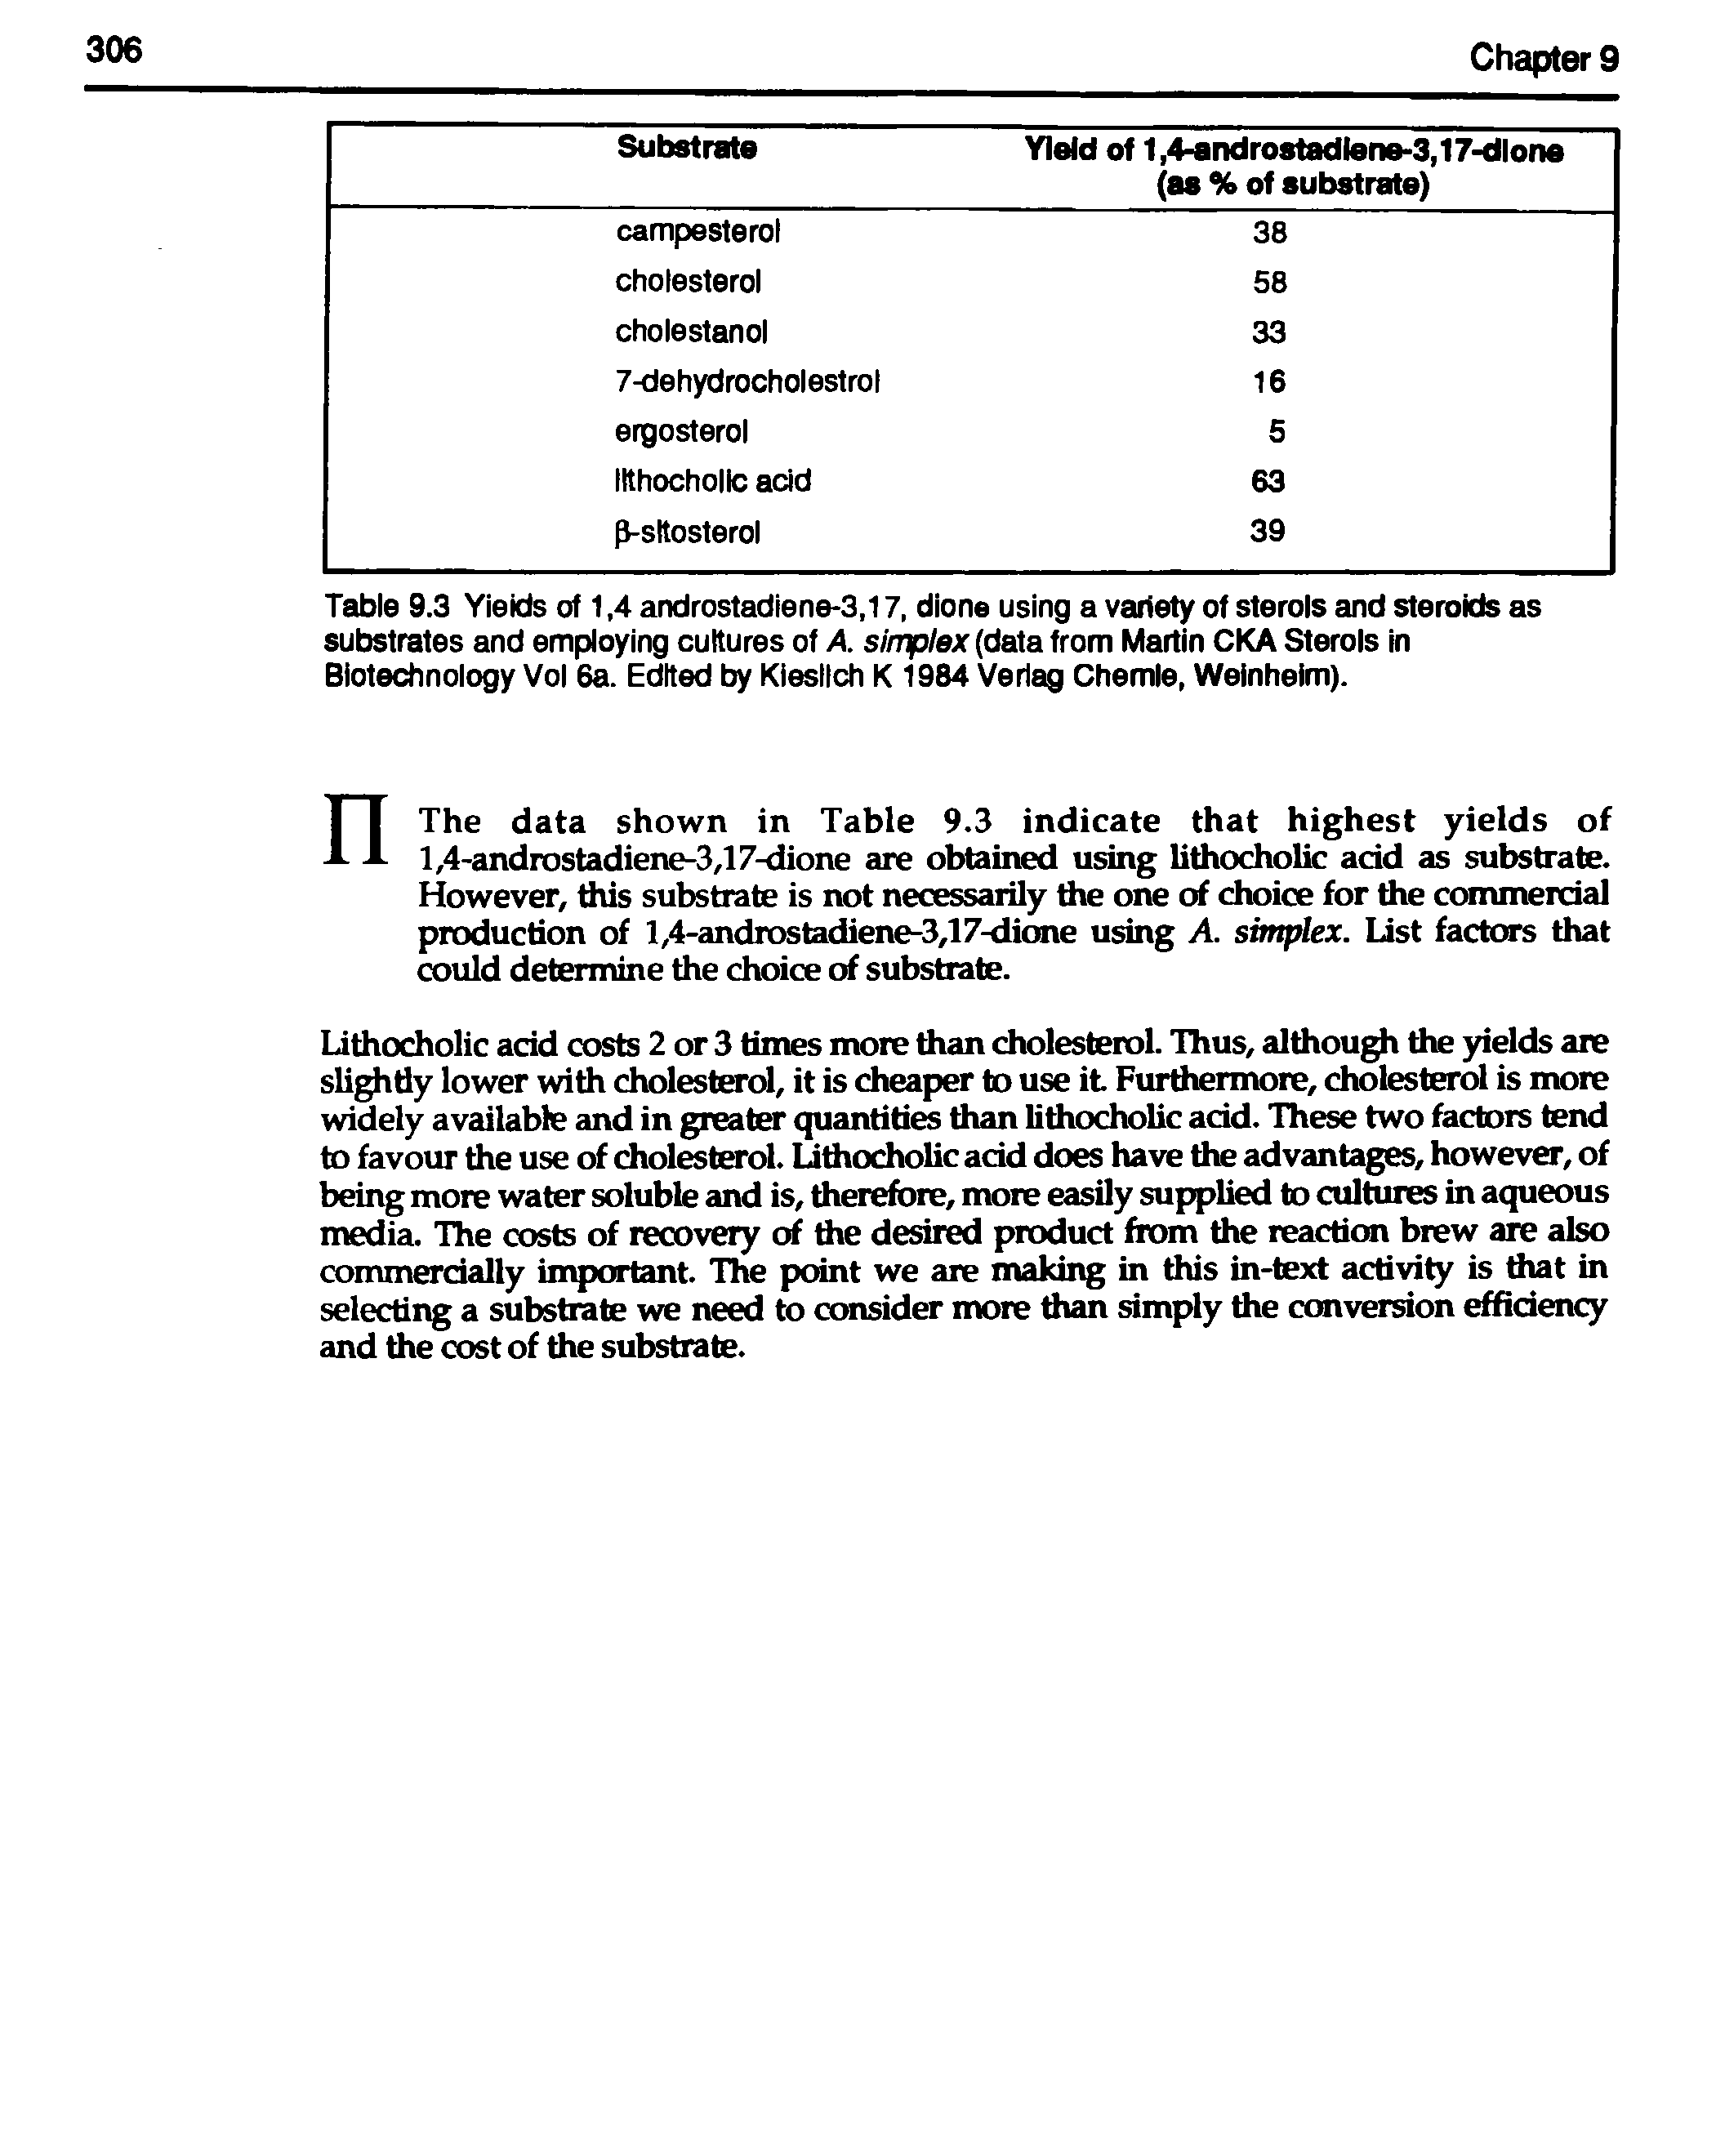 Table 9.3 Yieids of 1,4 androstadiene-3,17, dione using a variety of sterols and steroids as substrates and employing cultures of A. simplex (data from Martin CKA Sterols in Biotechnology Vol 6a. Edited by Kiesllch K 1984 Verlag Chemle, Weinheim).